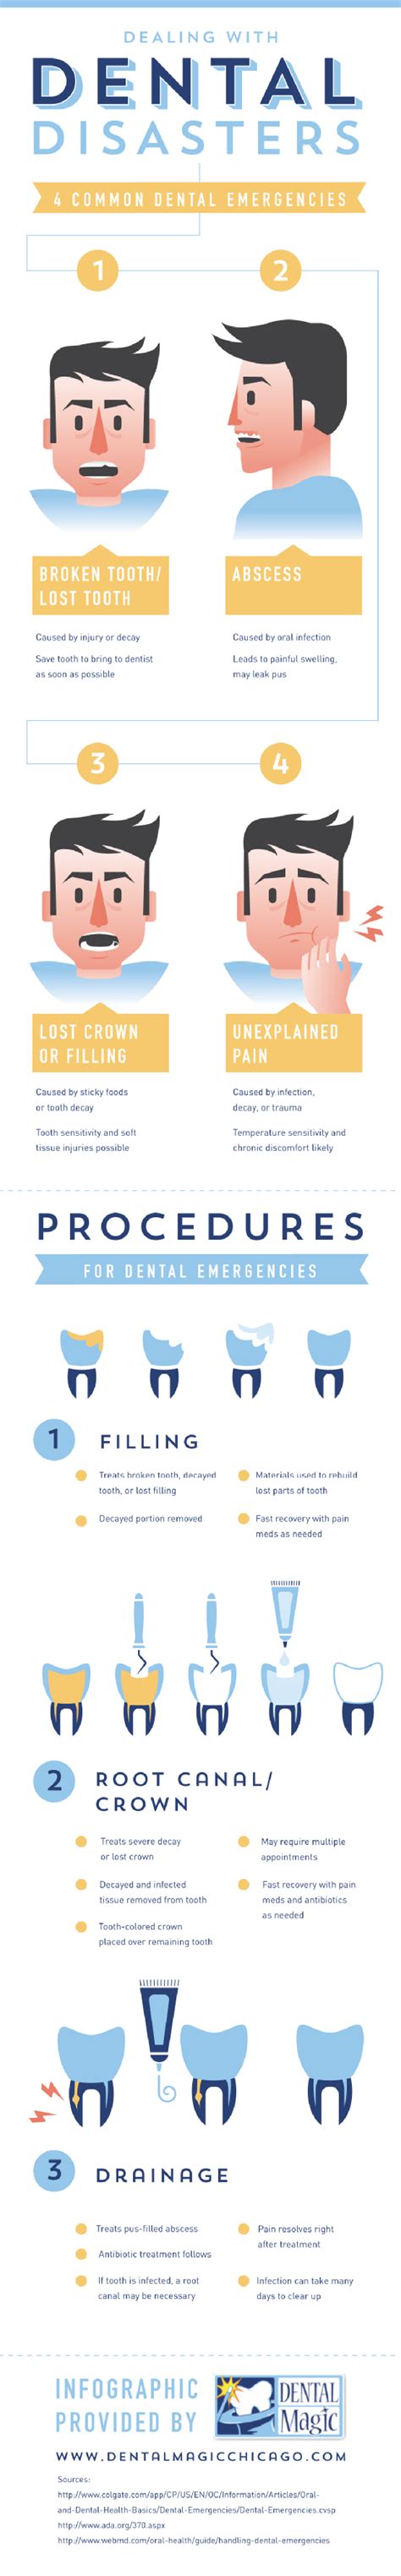 Dealing With Dental Disasters Visually